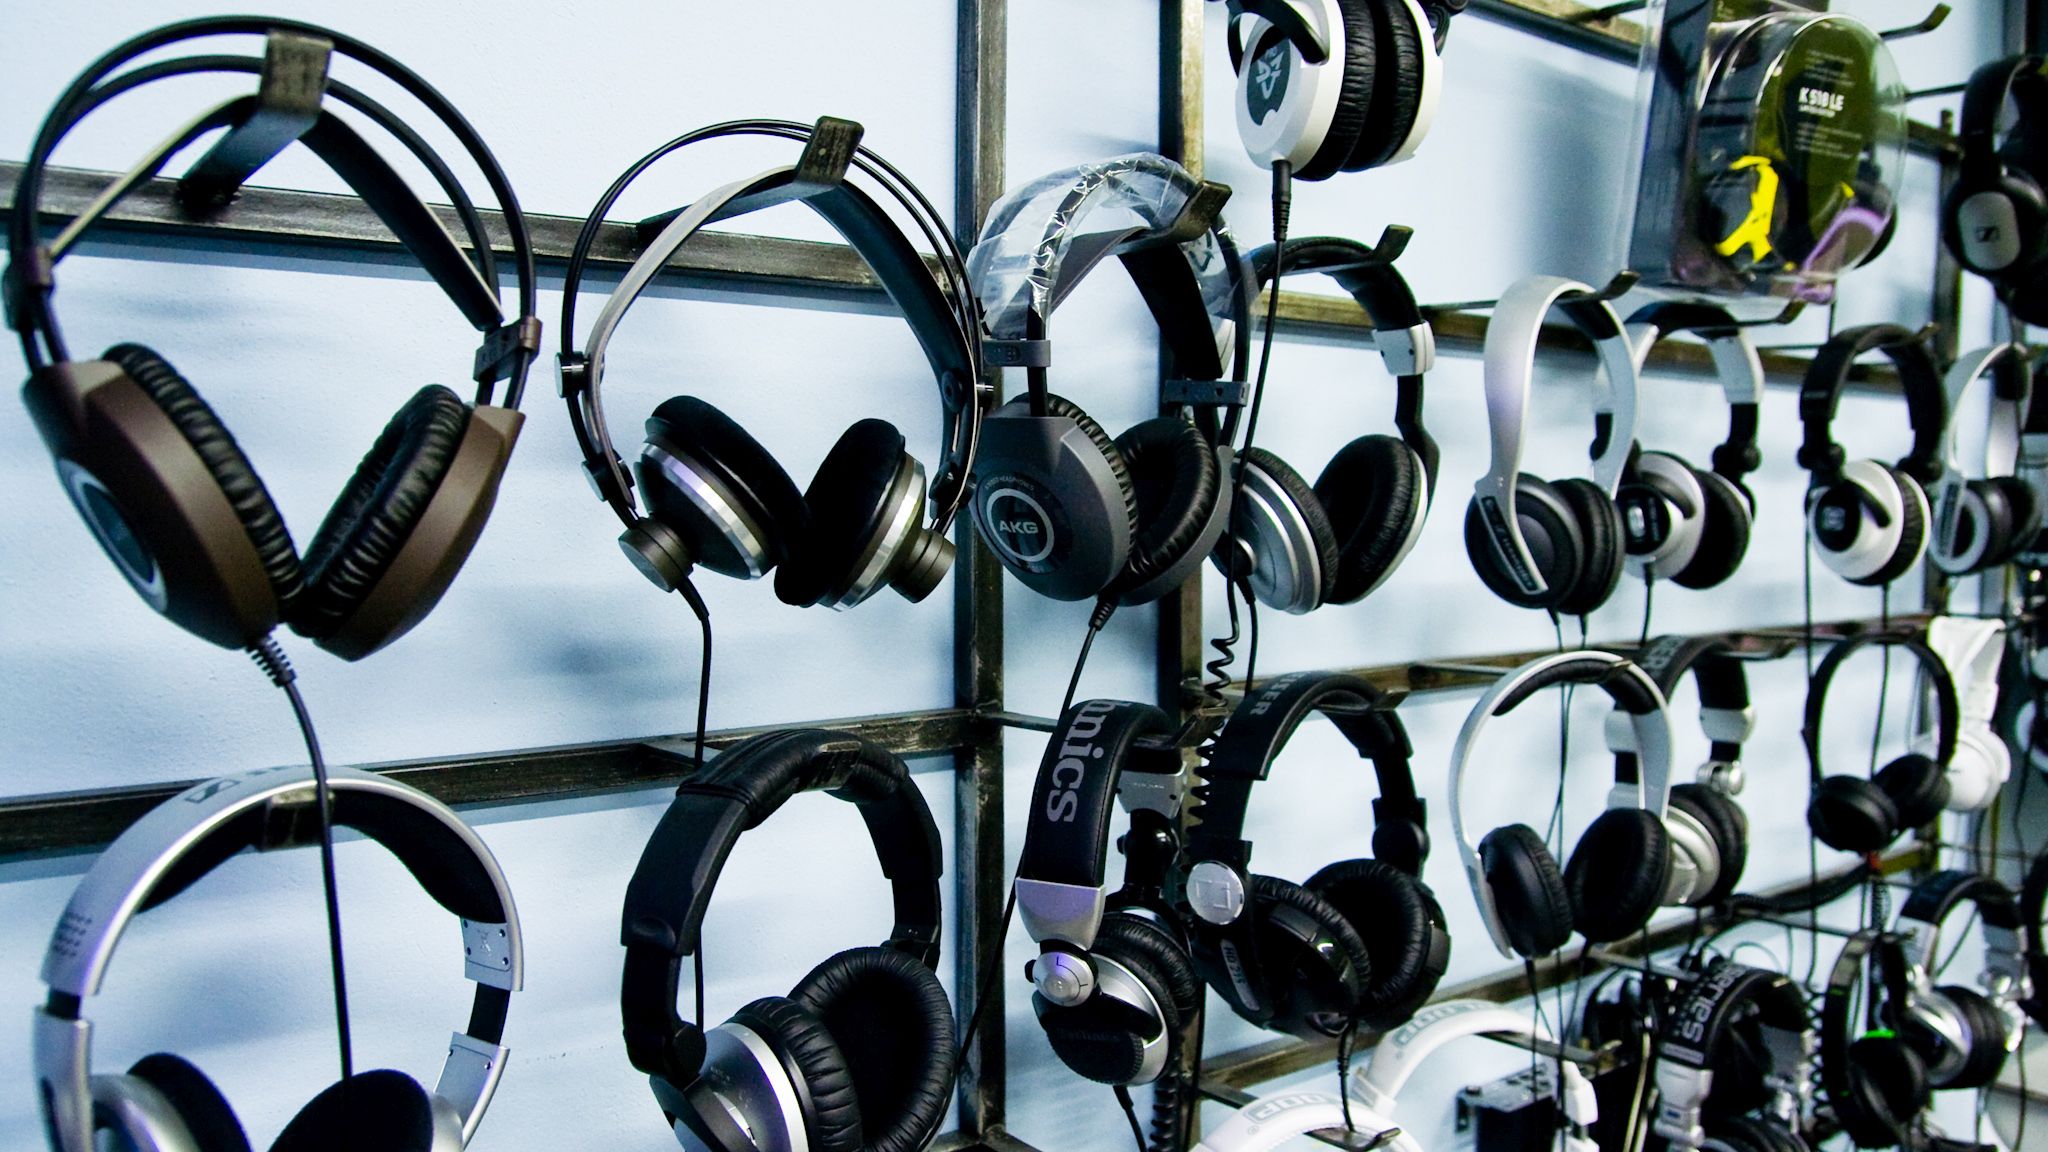 A display of used headphones for sale at a second hand store.